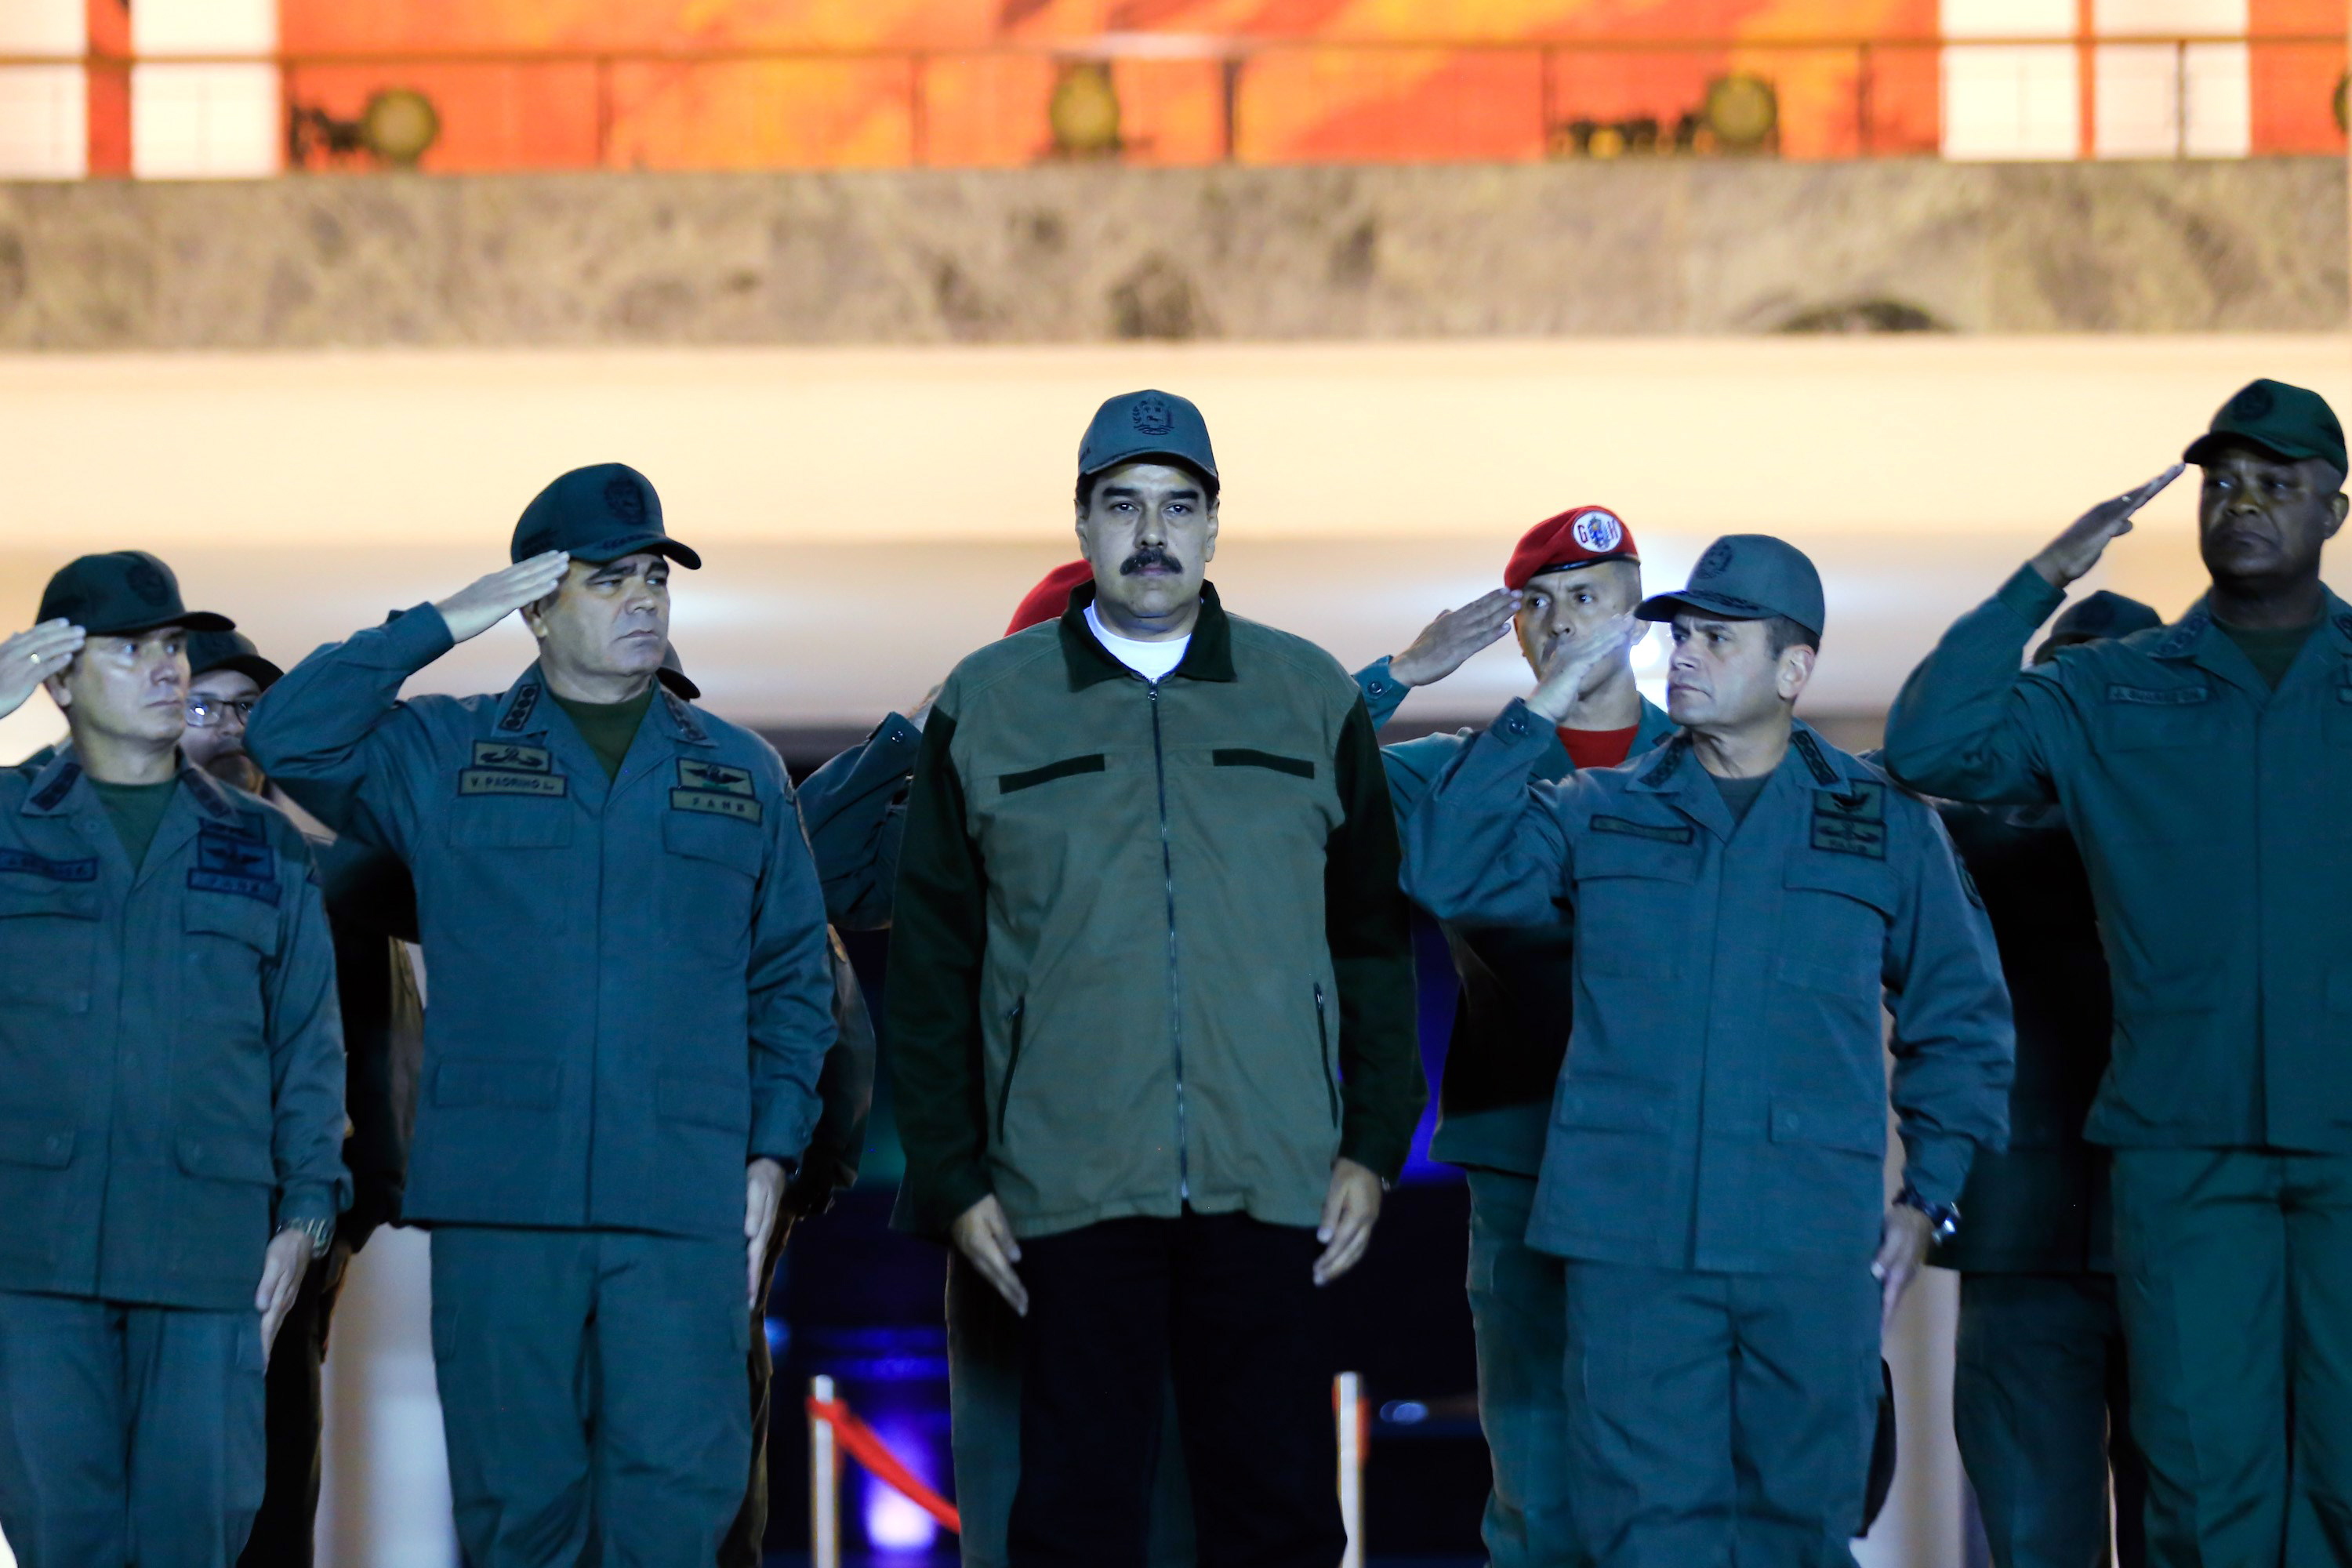 epa07542512 A handout photo made available by the press office of Miraflores shows Venezuelan President Nicolas Maduro (C) as he attends a official ceremony with members of the National Bolivarian Armed Forces of Venezuela, in Caracas, Venezuela, 02 May 2019.  EPA/HANDOUT HANDOUT  HANDOUT EDITORIAL USE ONLY/NO SALES